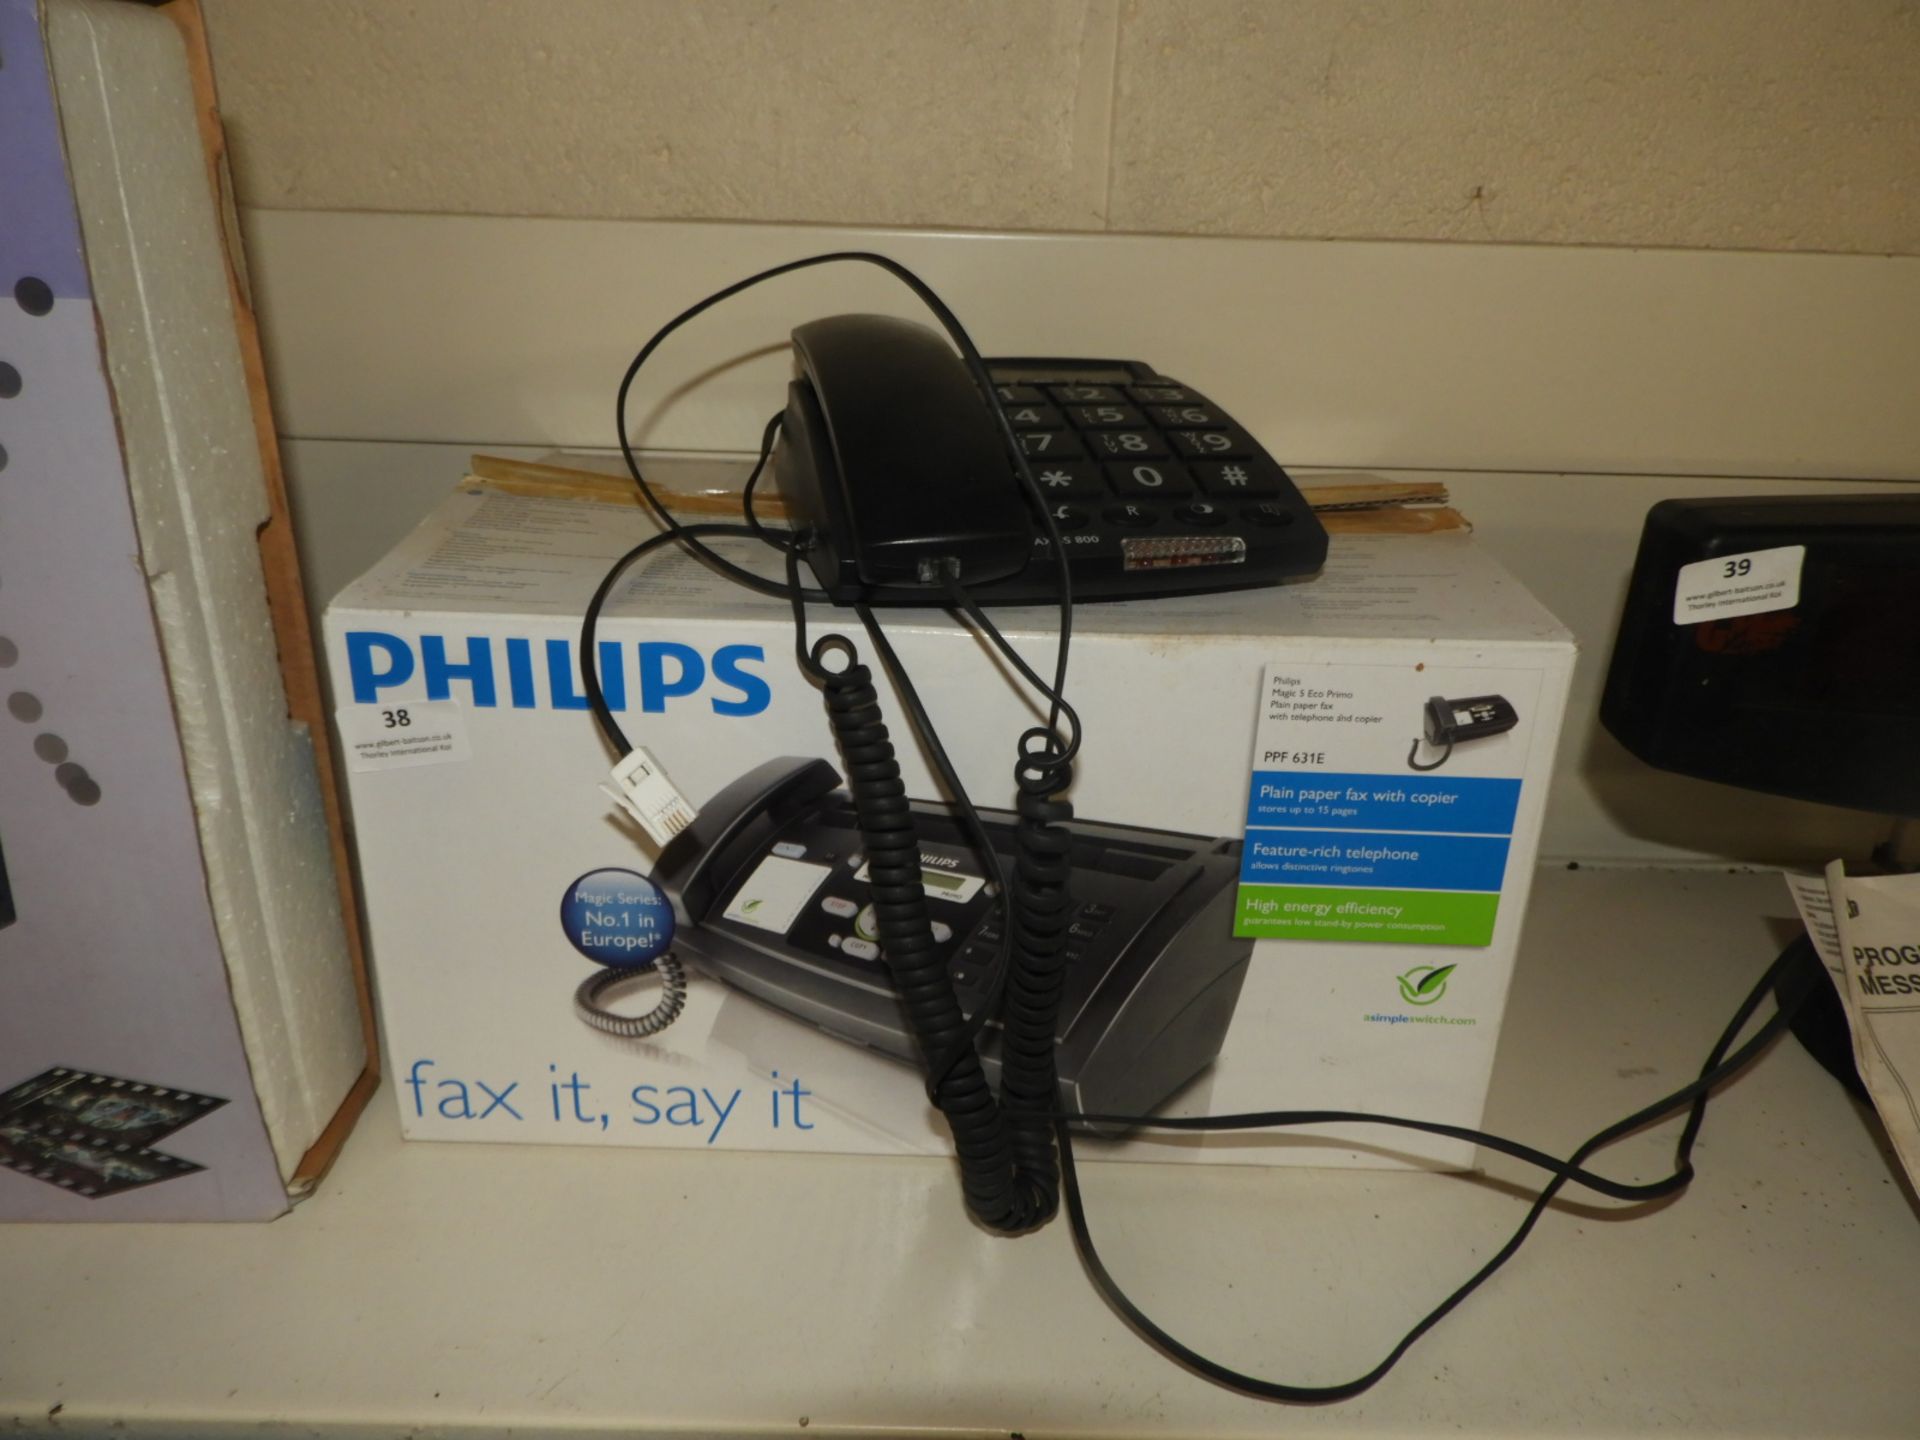 Philips Fax Machine and a Big Button Telephone